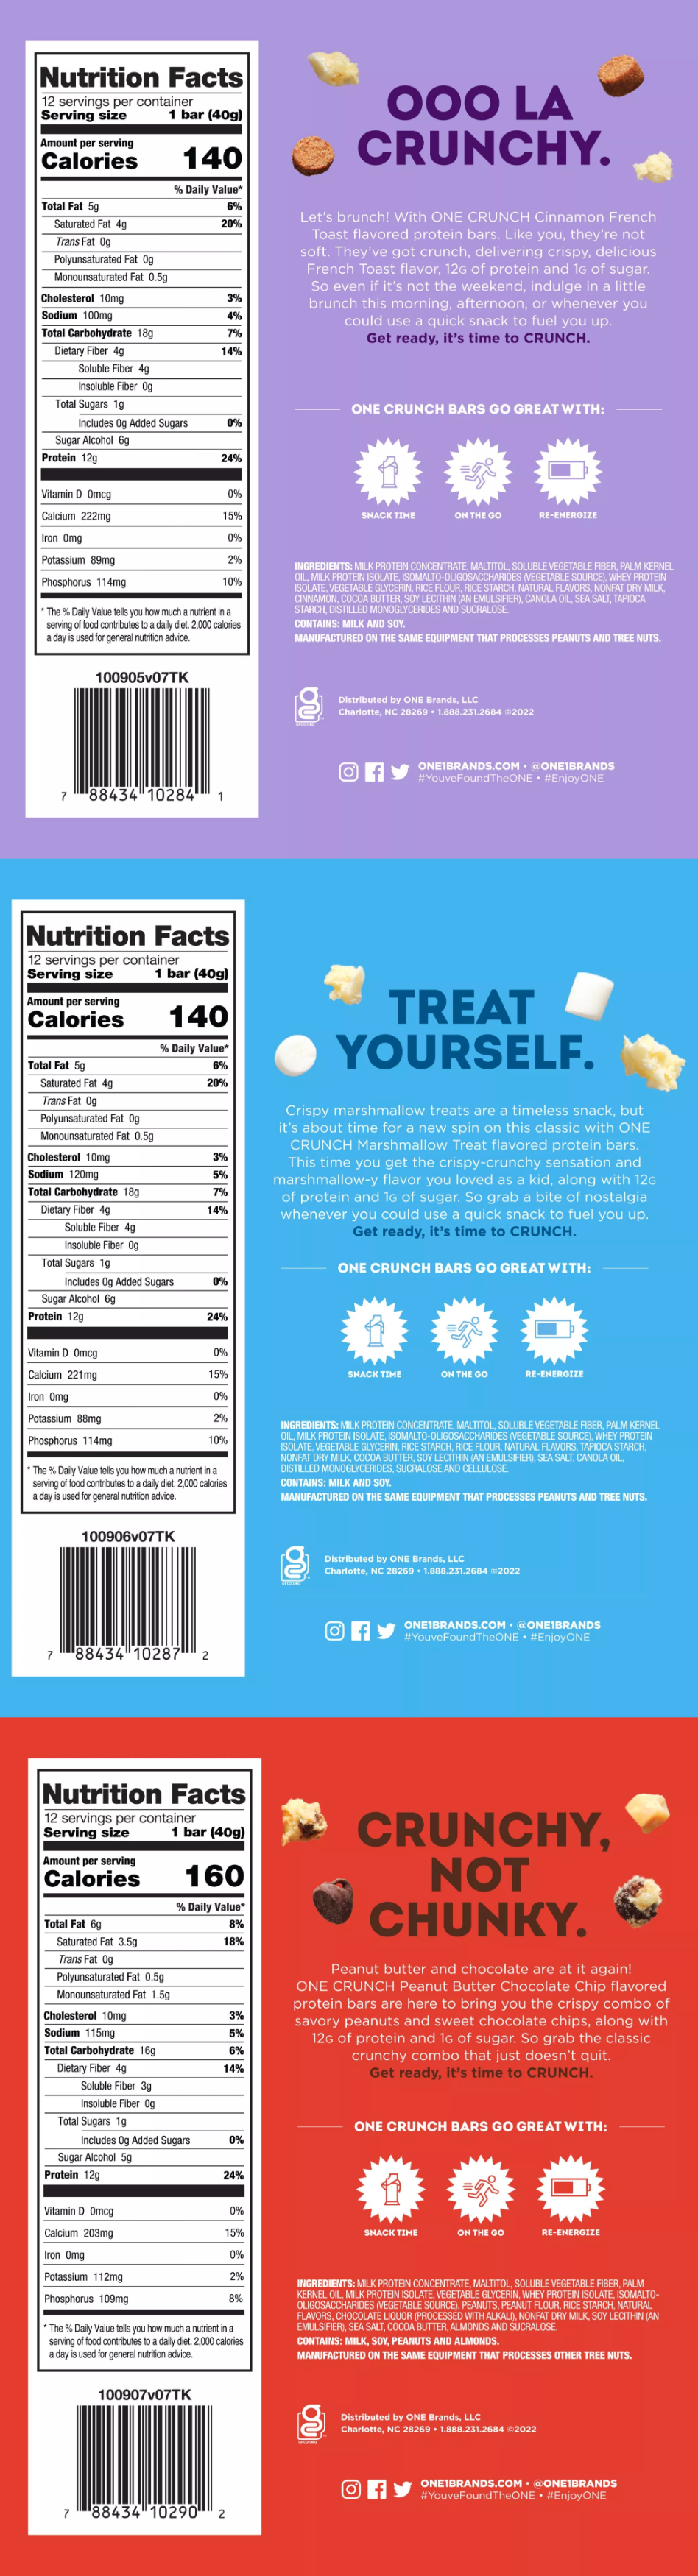 Nutrition facts for ONE Crunch protein bars in the variants Cinnamon French Toast, Marshmallow Treat, and Peanut Butter Chocolate Chip.